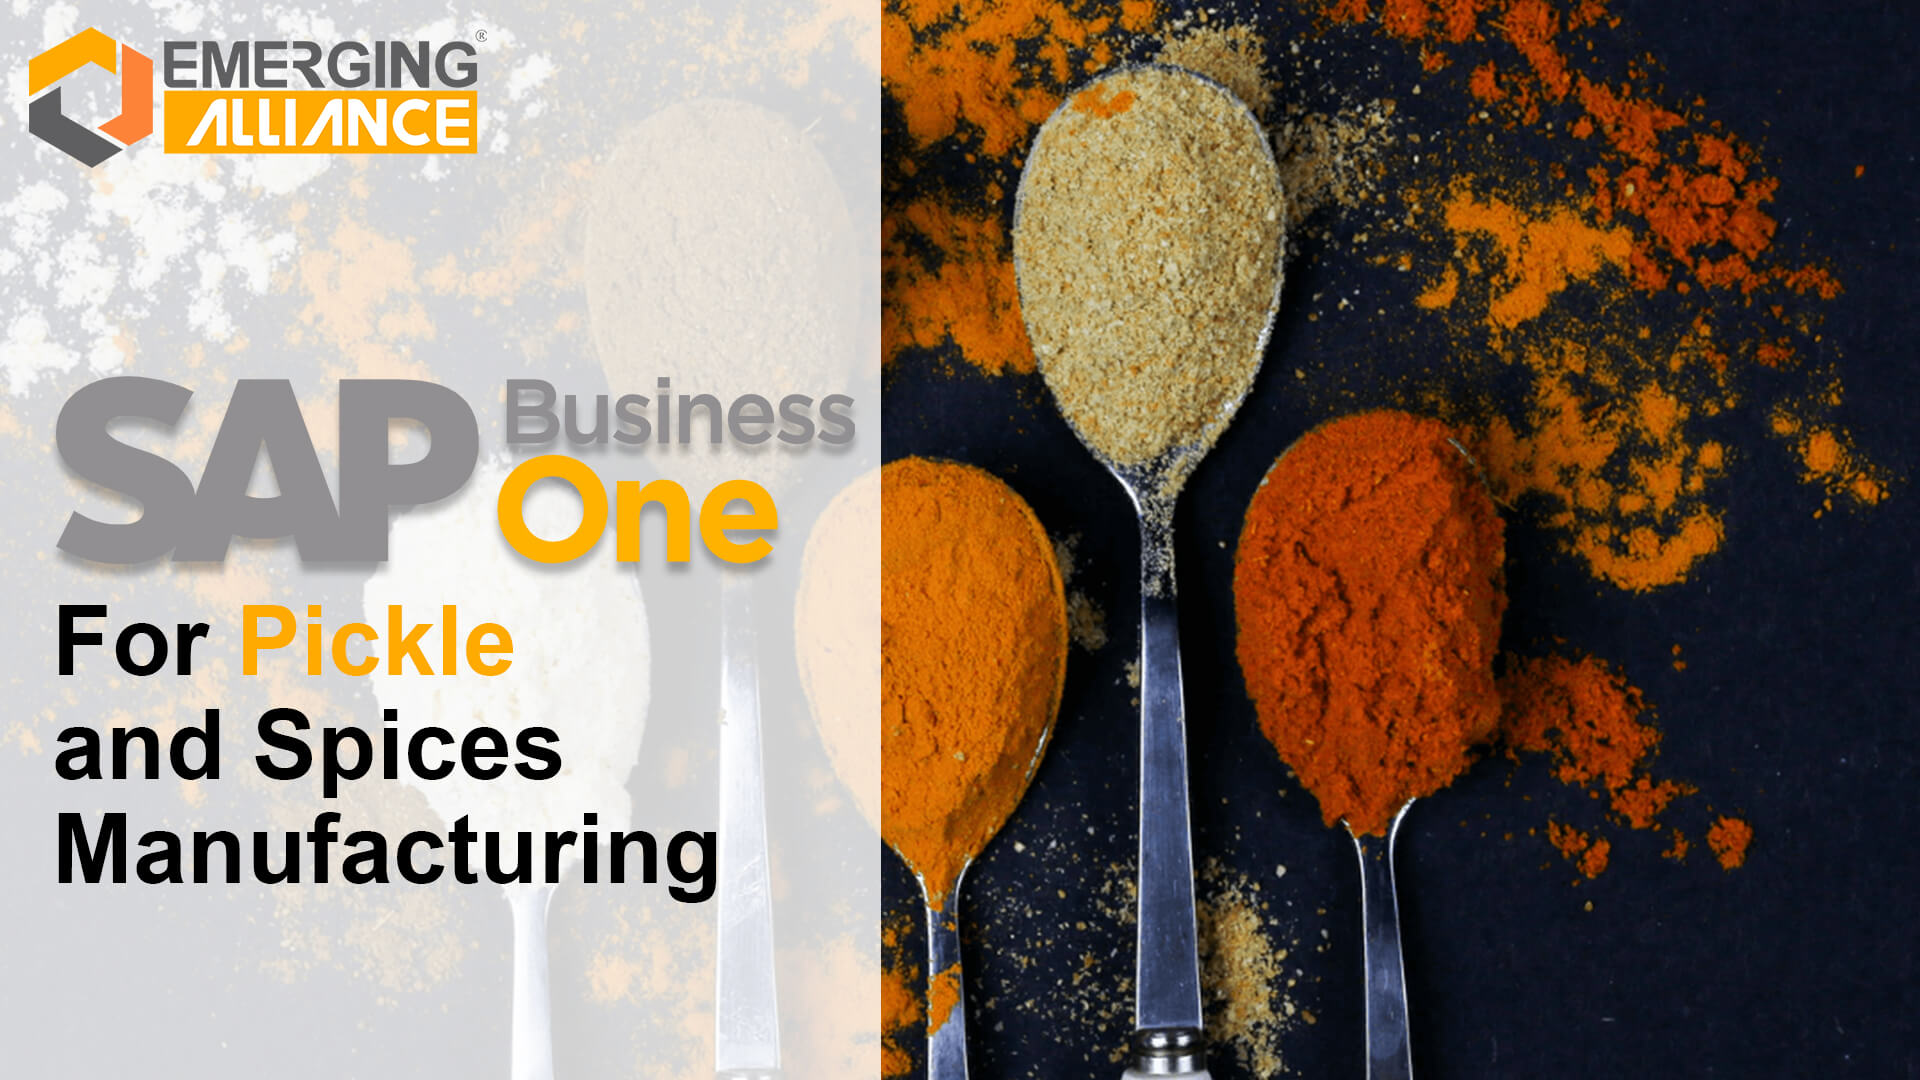 sap business one for pickle and spices manufacturing